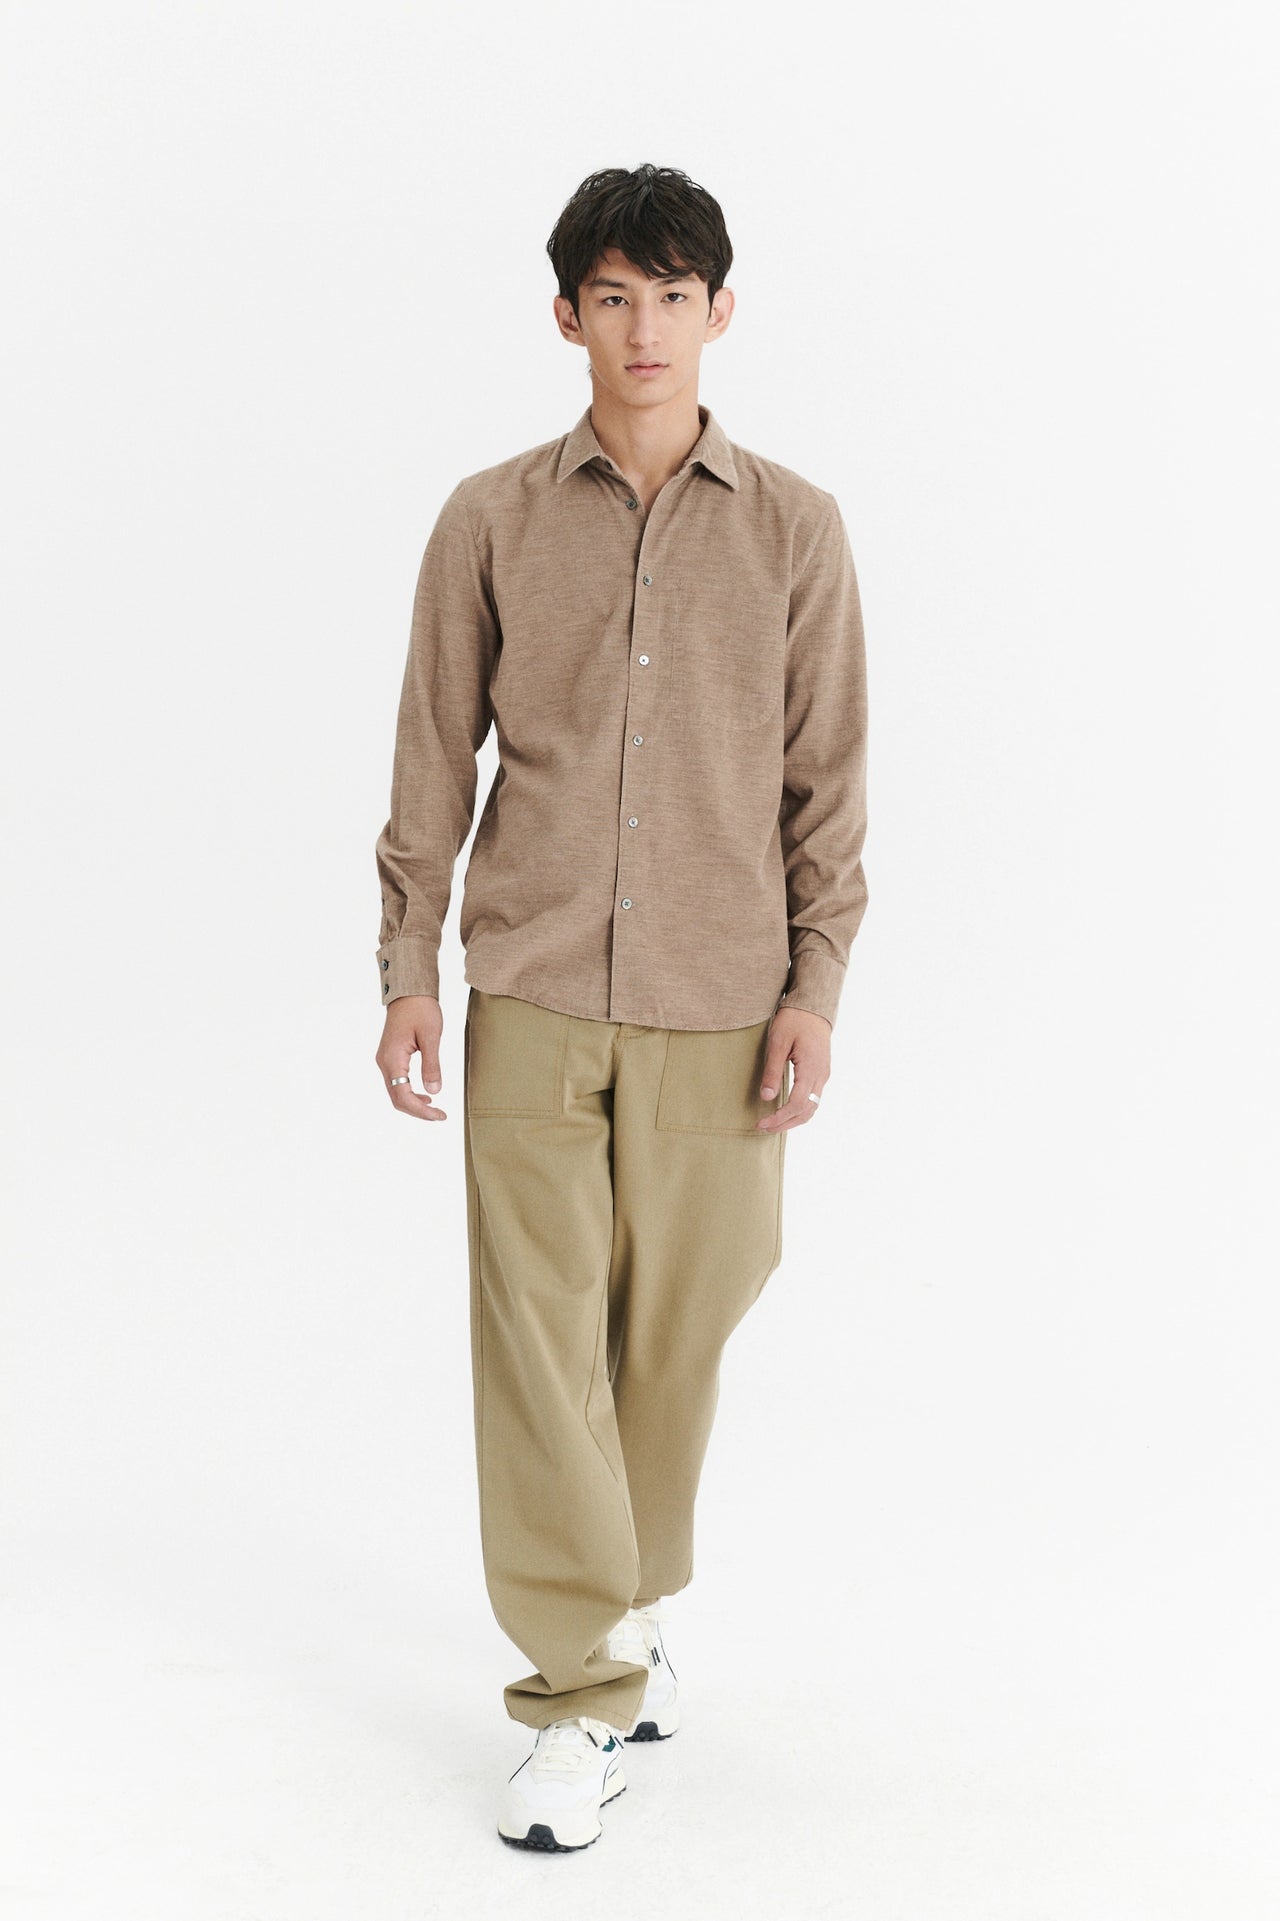 Feel Good Shirt in a Light Brown Taupe Soft Japanese Corduroy Cotton